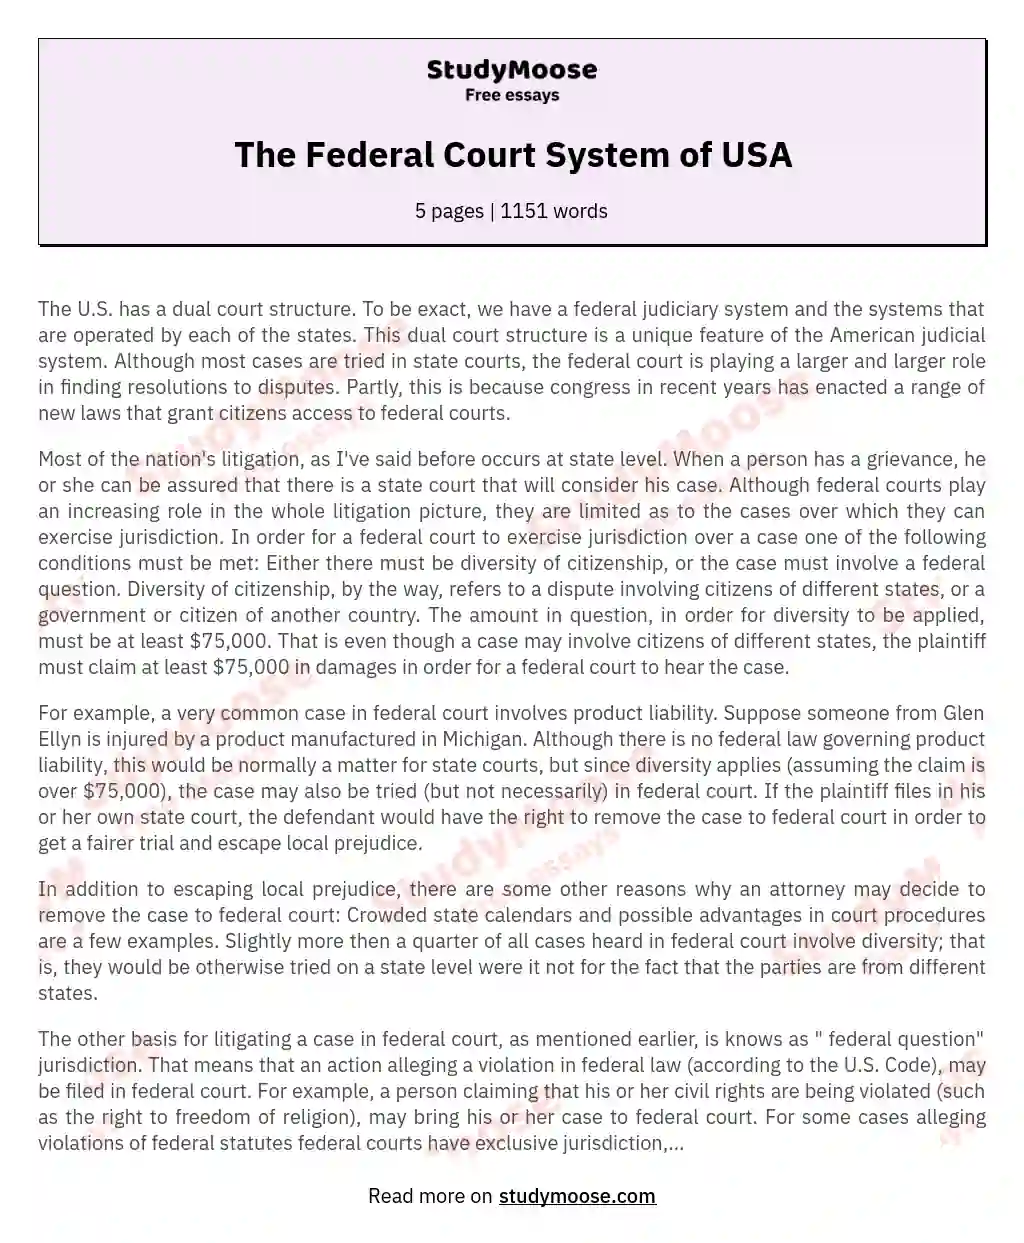 The Federal Court System of USA essay